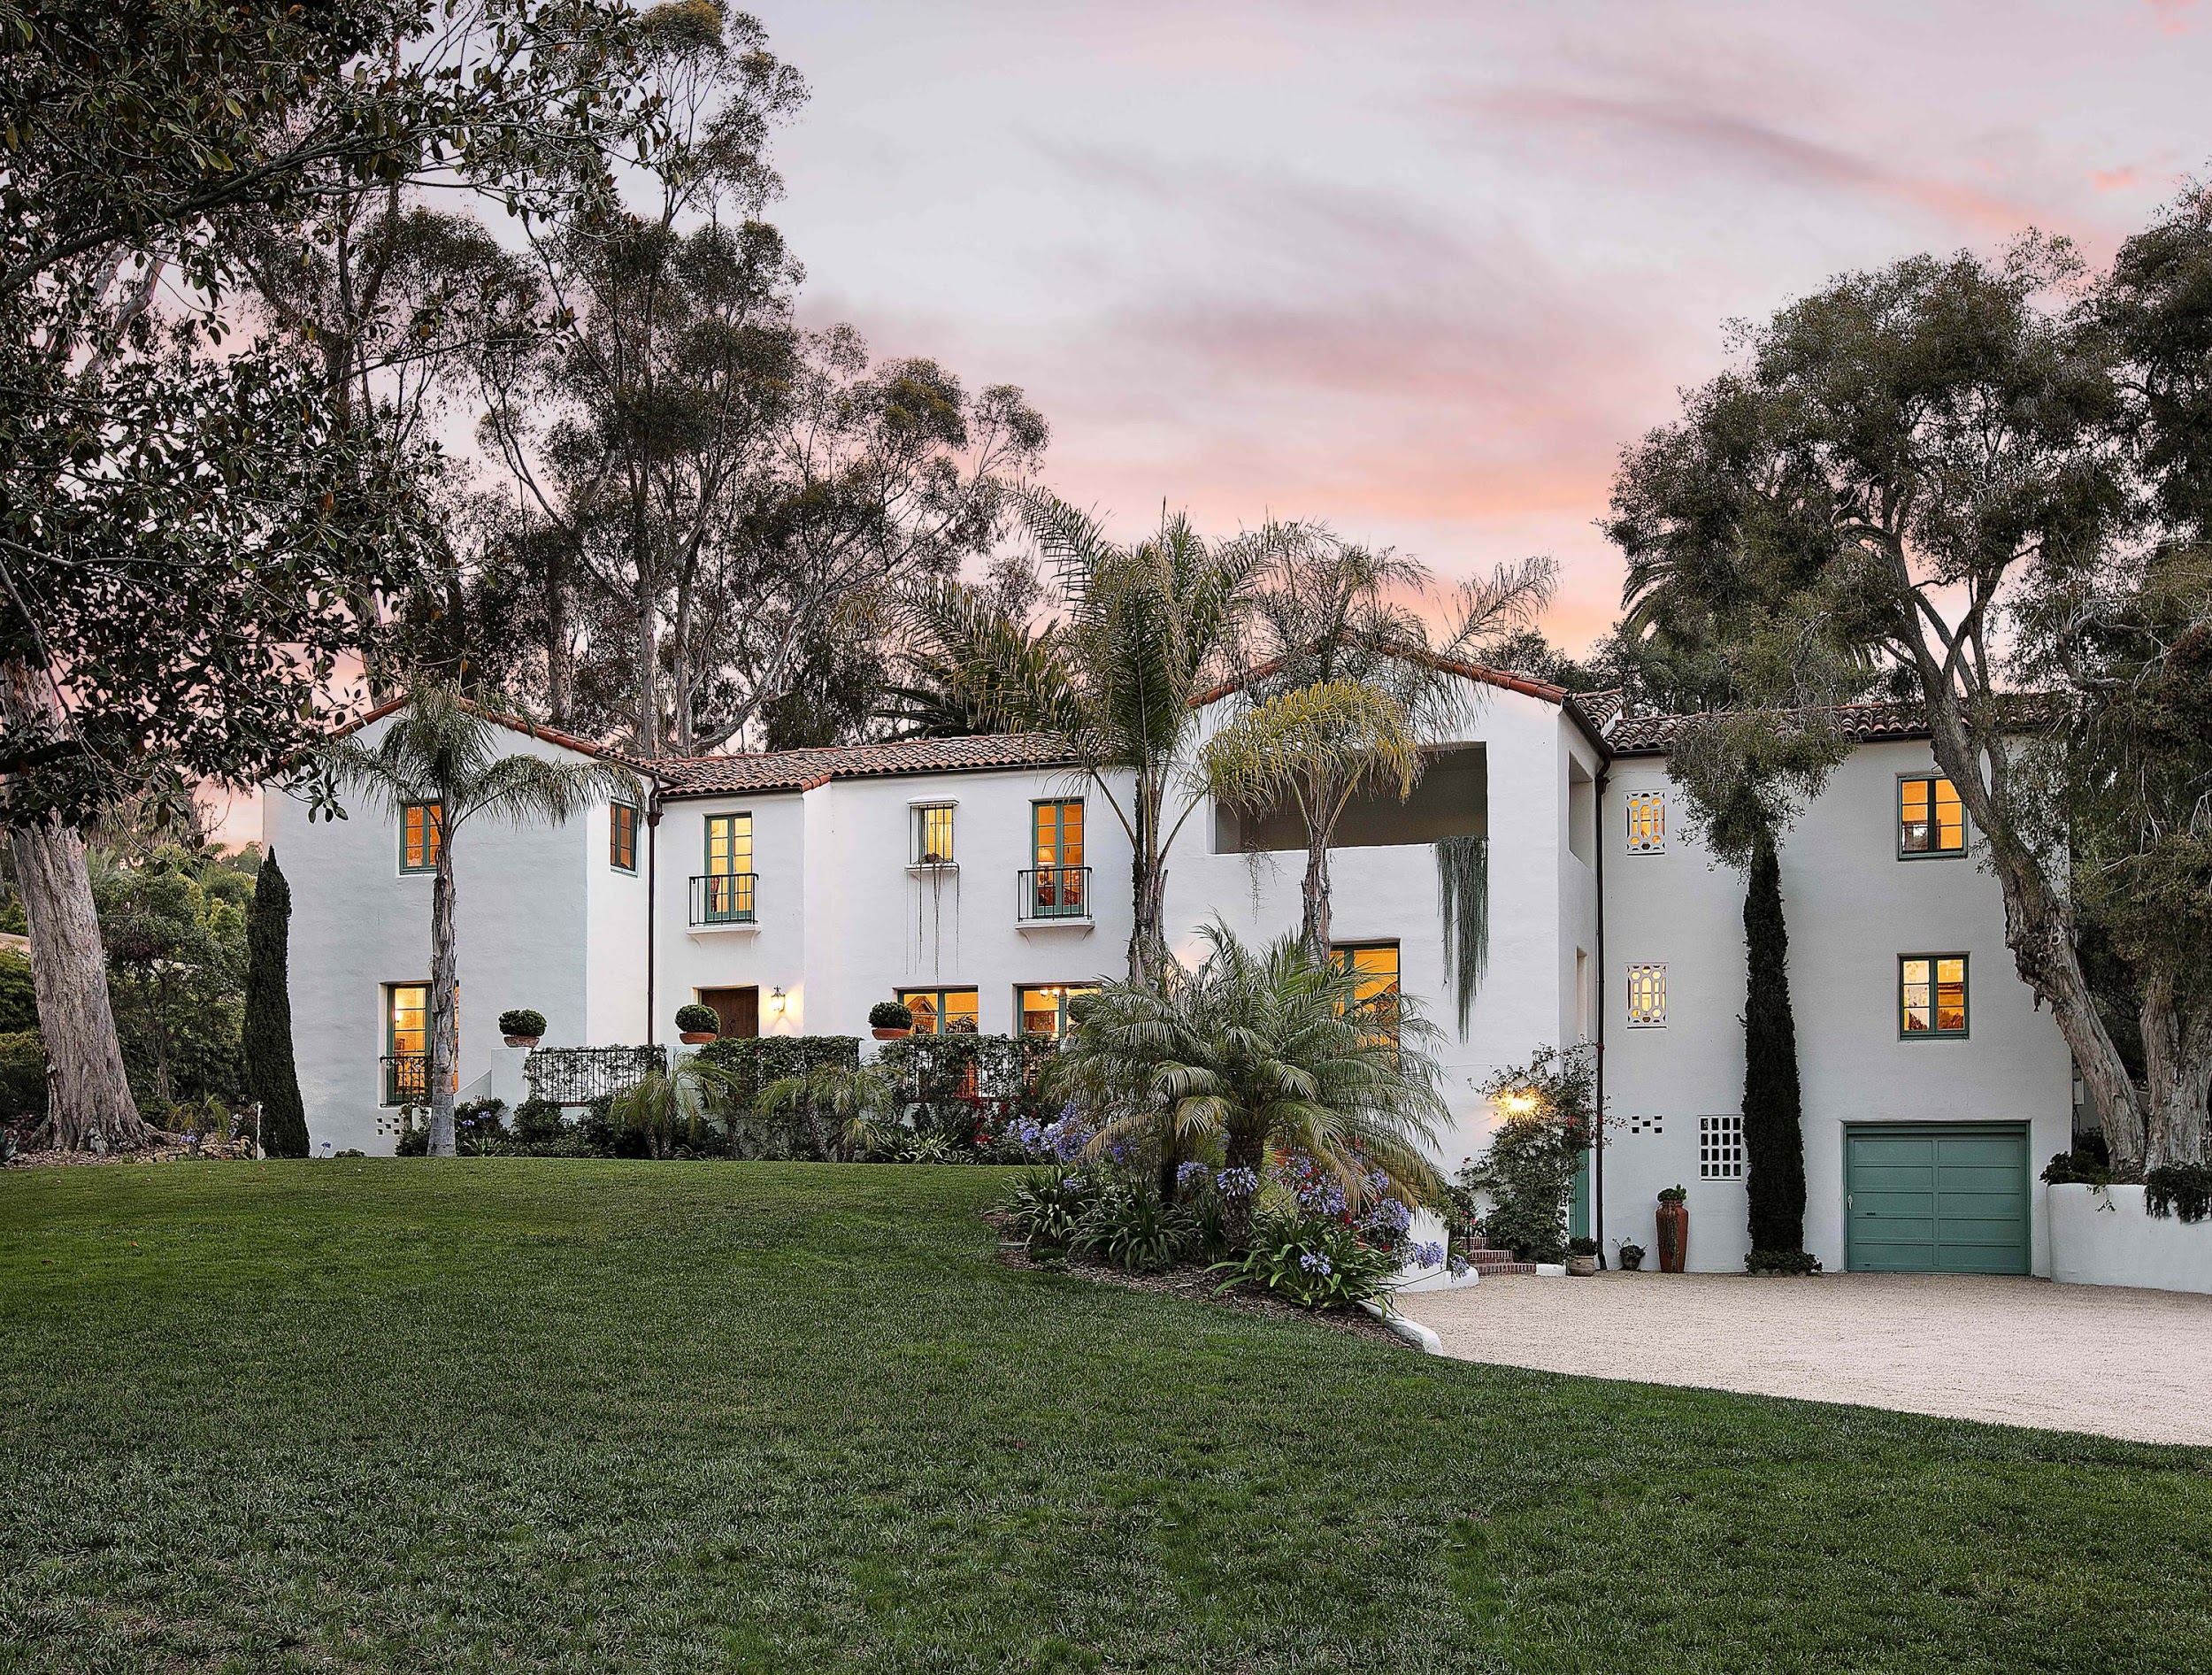 3 Impossibly Cool Spanish Colonial Revival Houses In LA & Beyond